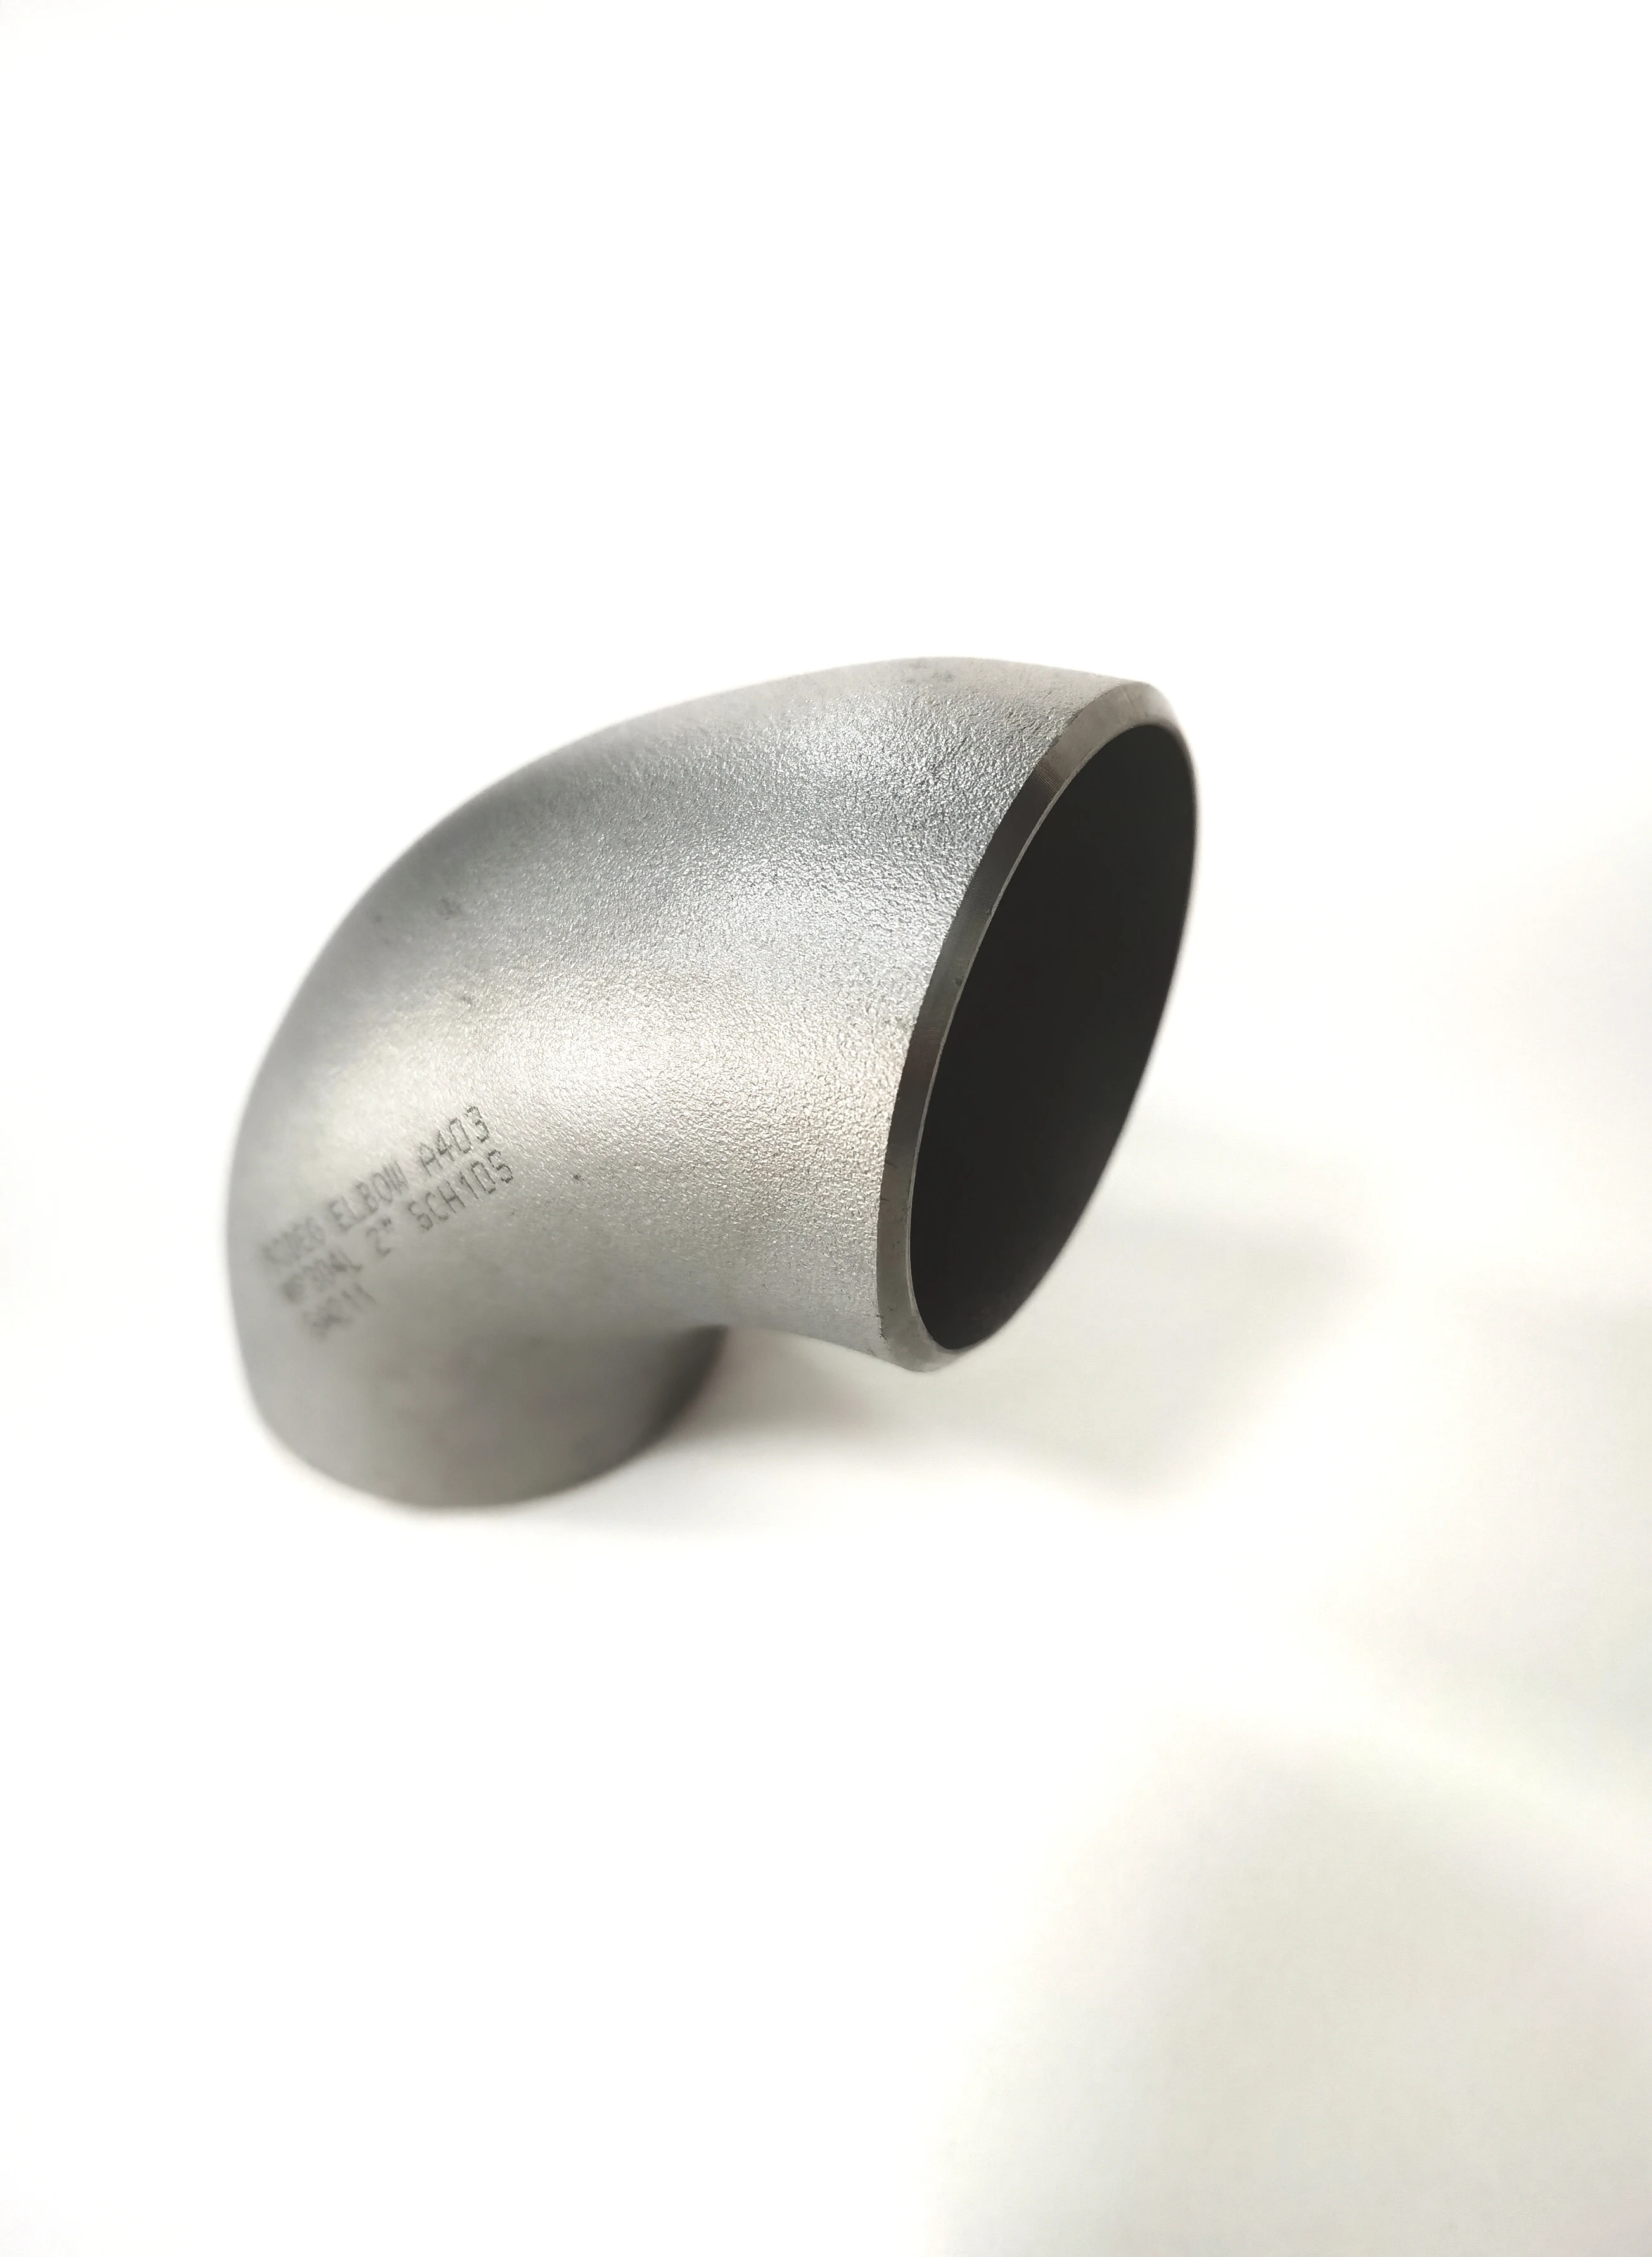 Hot sell 304 stainless steel grade 90 degree deg welding bend elbow connector DIN ISO elbow pipe fittings NingBo